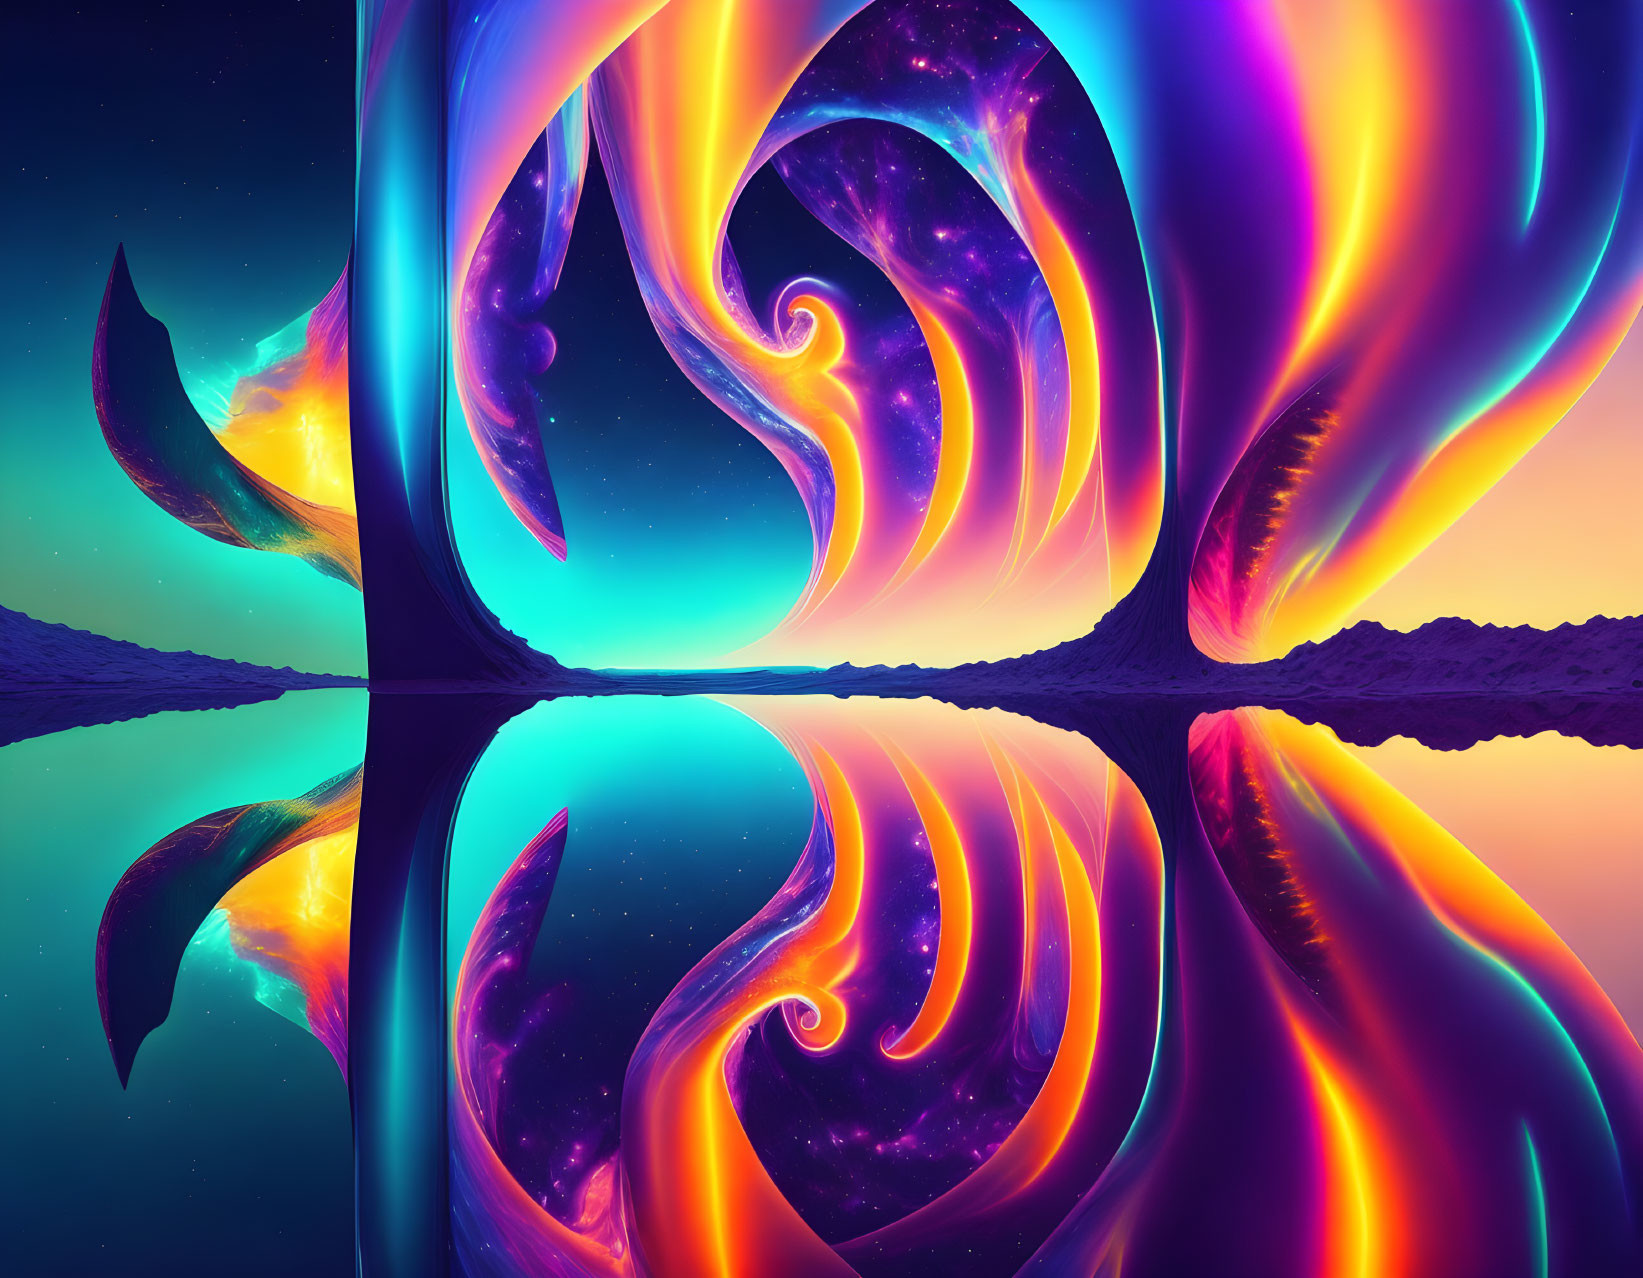 Colorful cosmic fractal art against starry night sky